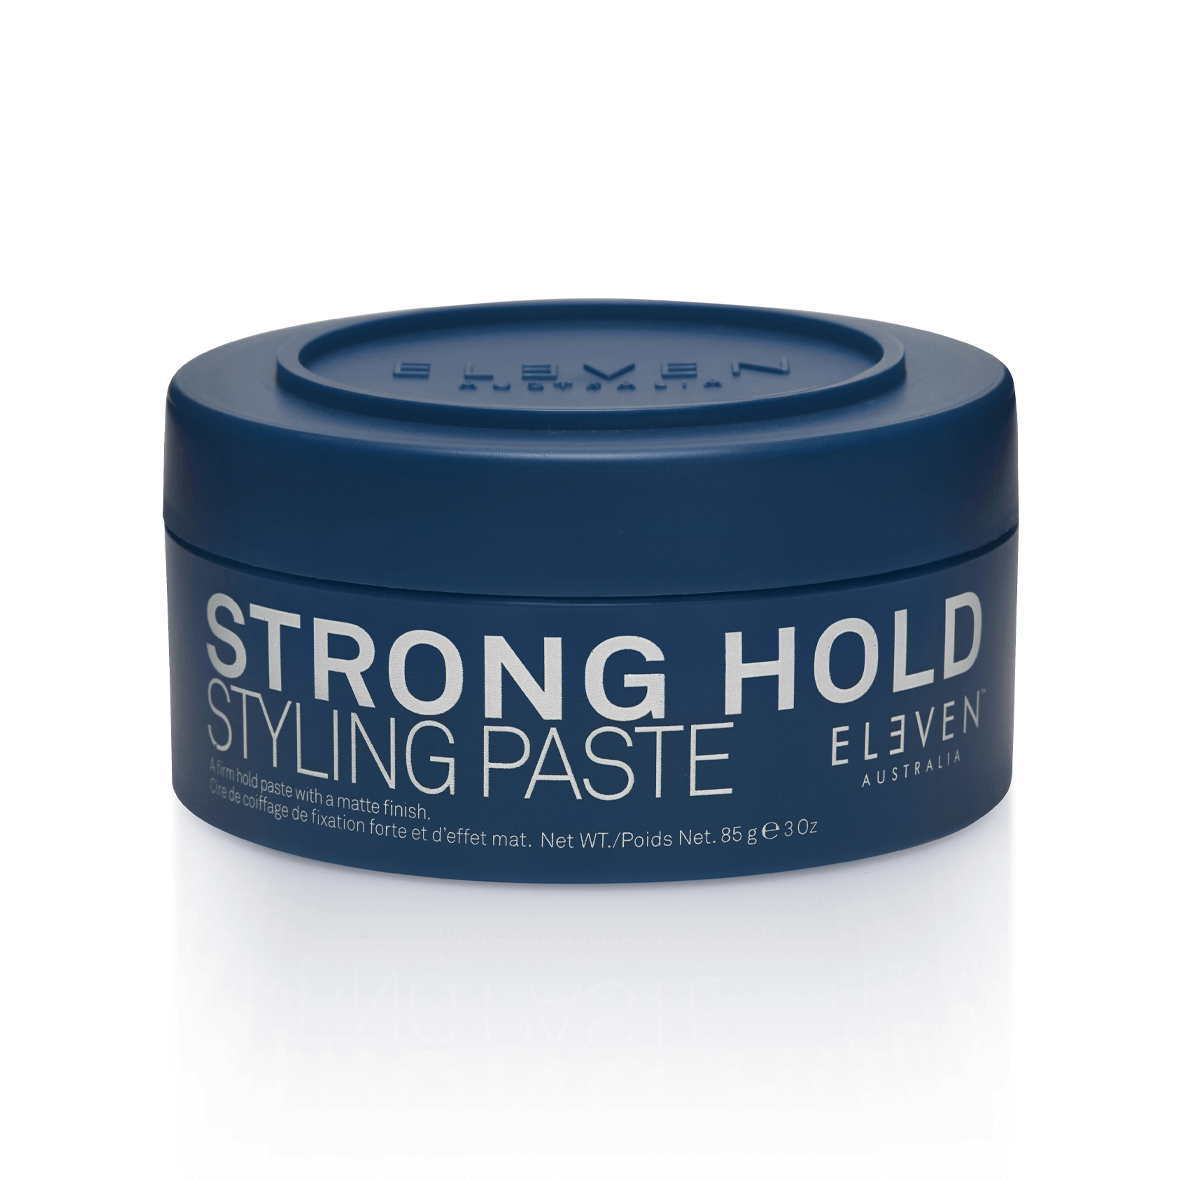 ELEVEN STRONG HOLD STYLING PASTE